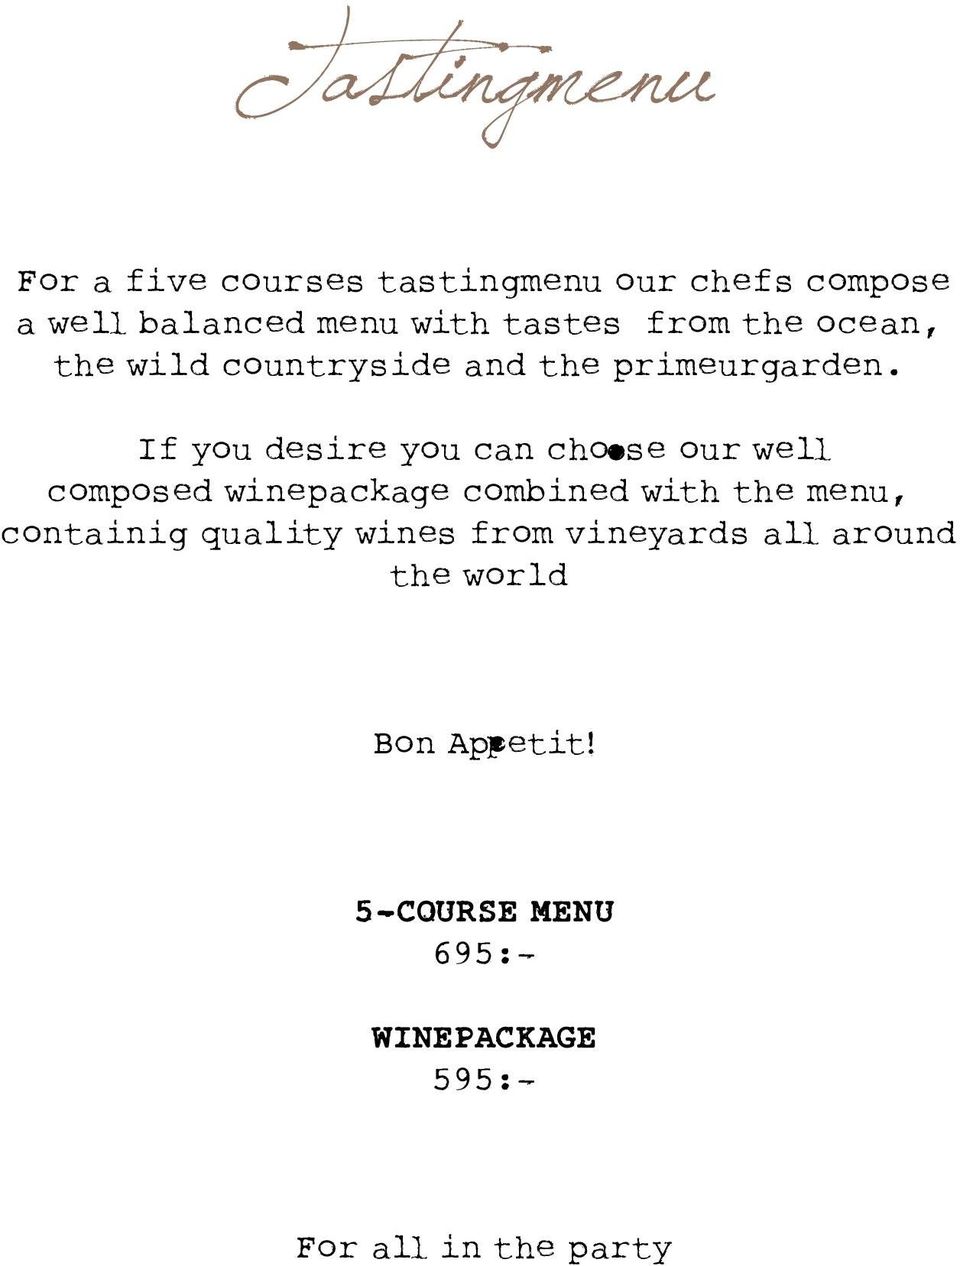 If you desire you can choose our well composed winepackage combined with the menu,